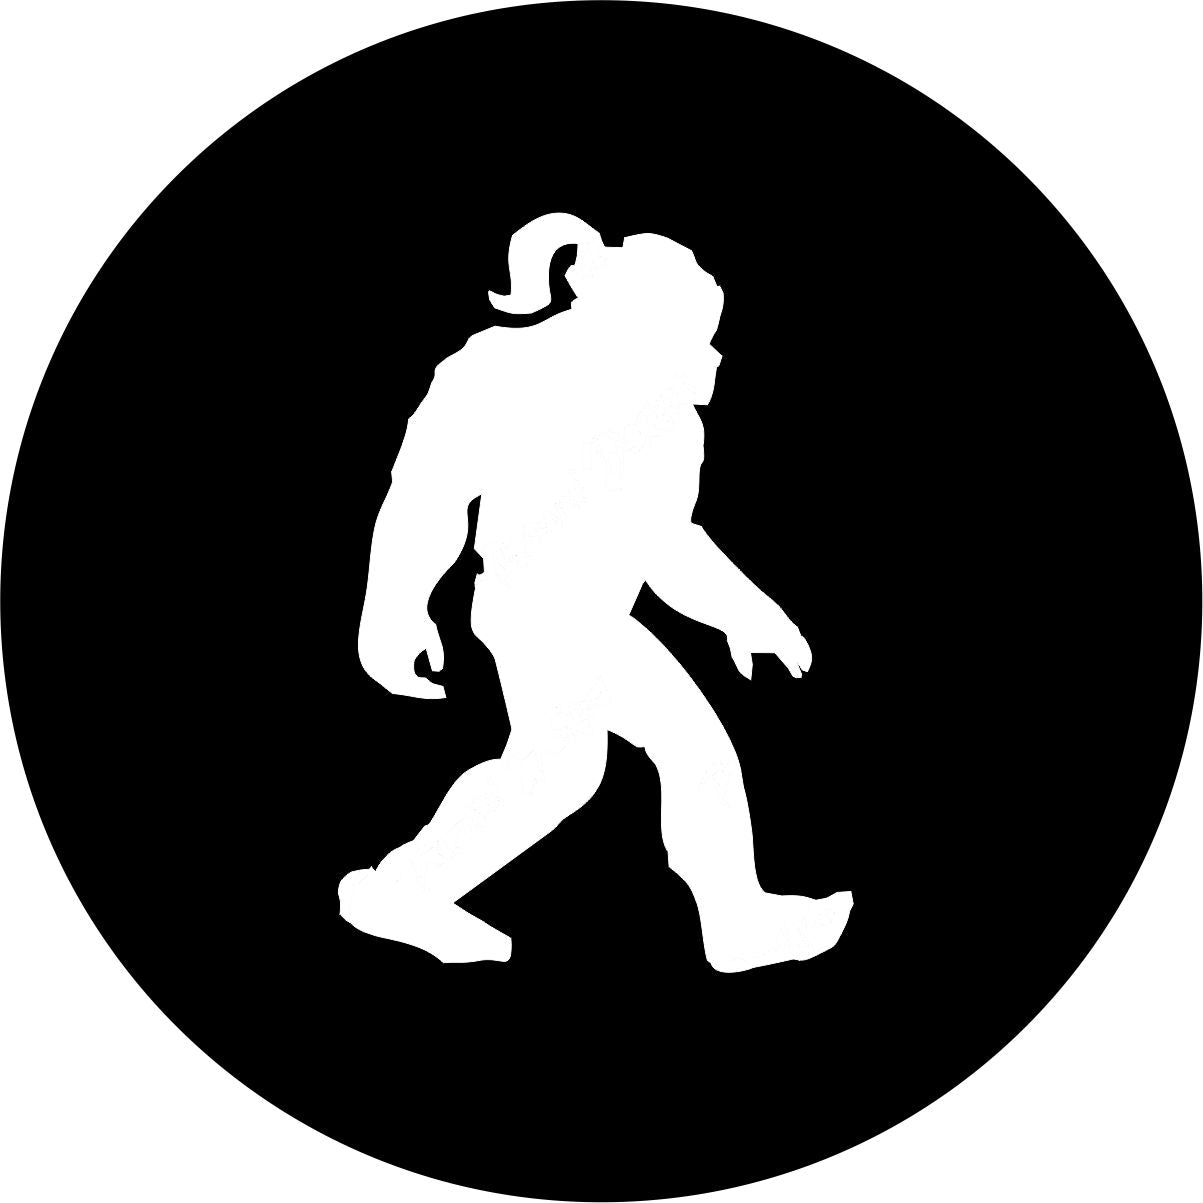 Black vinyl spare tire cover with a silhouette of a bigfoot shesquatch walking across the center.